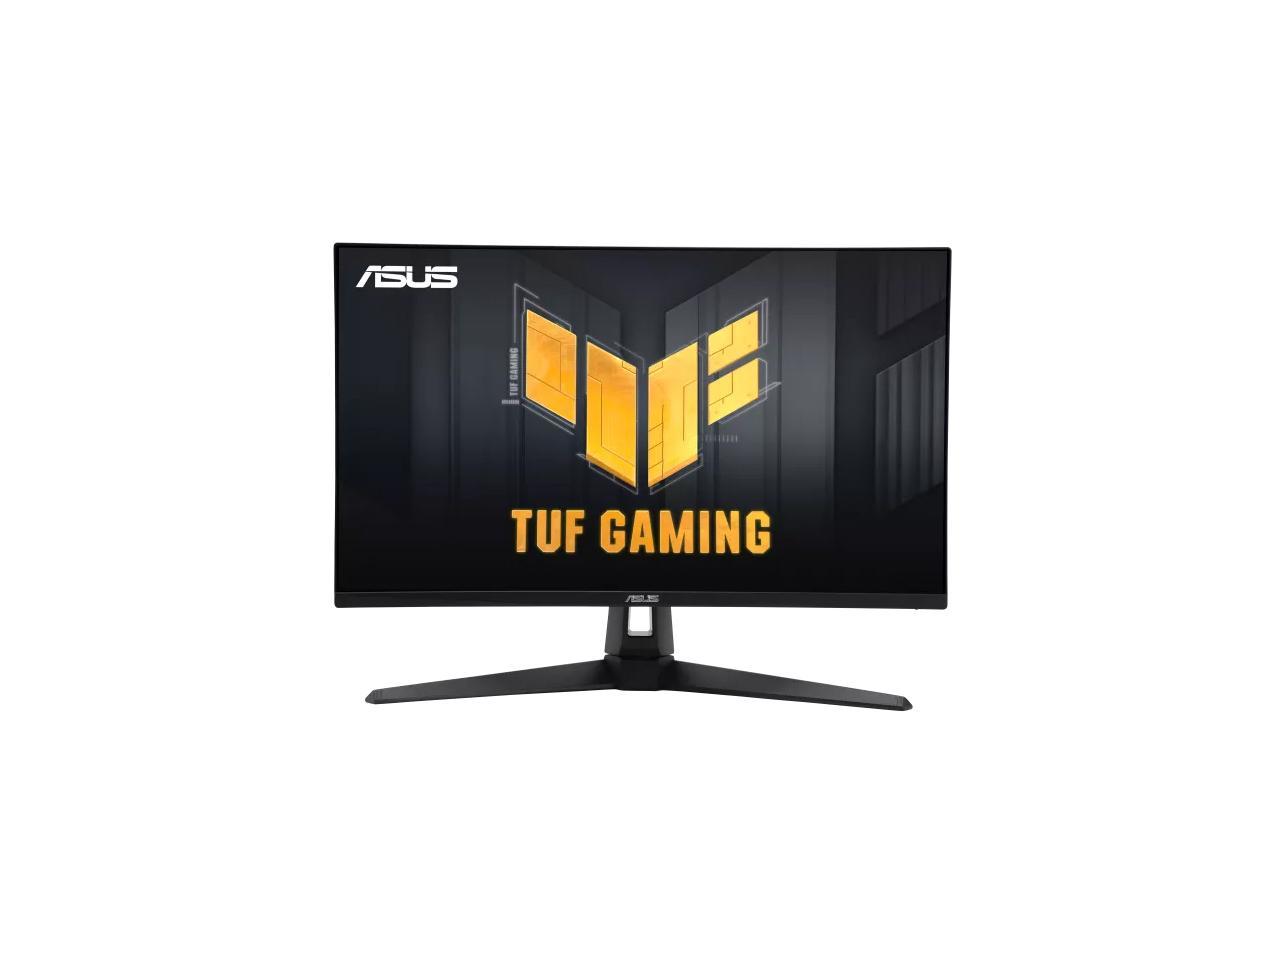 27" Asus 170hz WQHD 1ms Freesync Gaming Monitor $220 after $20 rebate + Free Shipping